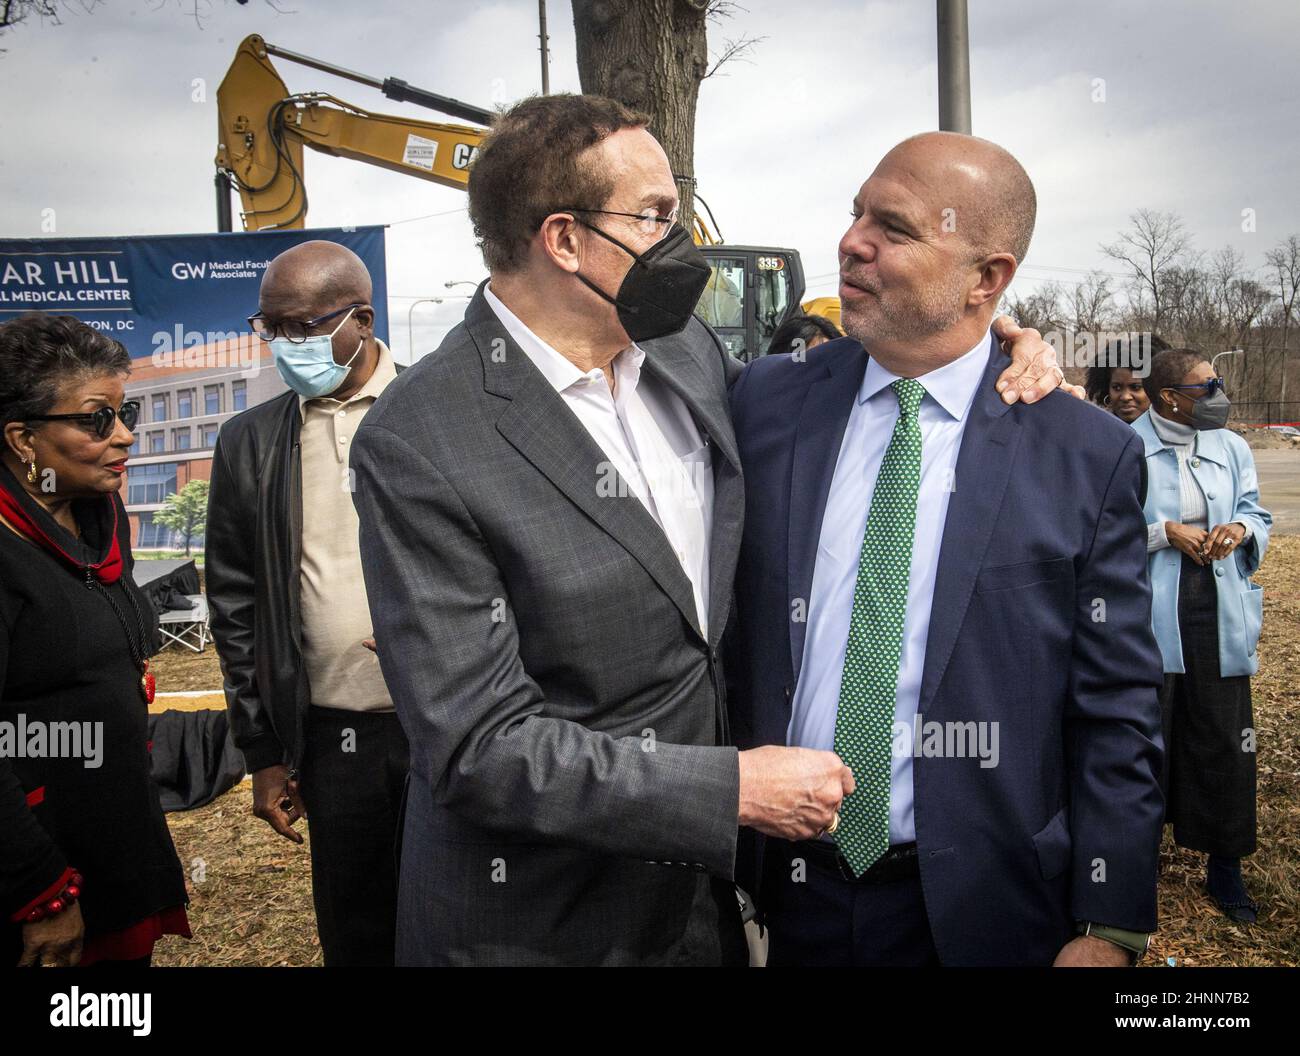 Washington, United States. 17th Feb, 2022. WASHINGTON, DC - FEBRUARY 17: Former council person David Catania, right, greets former Mayor Vincent Gray before Mayor Muriel Bowser, Universal Health Services, George Washington University, Children's National Hospital, and other honored guests gather at the groundbreaking and name reveal of the New Hospital at St Elizabeths East Campus in Washington, DC. At far left is Cora Master Barry, widow of the late Mayor Barry. (Photo by Bill O'Leary/The Washington Post) Credit: UPI/Alamy Live News Stock Photo